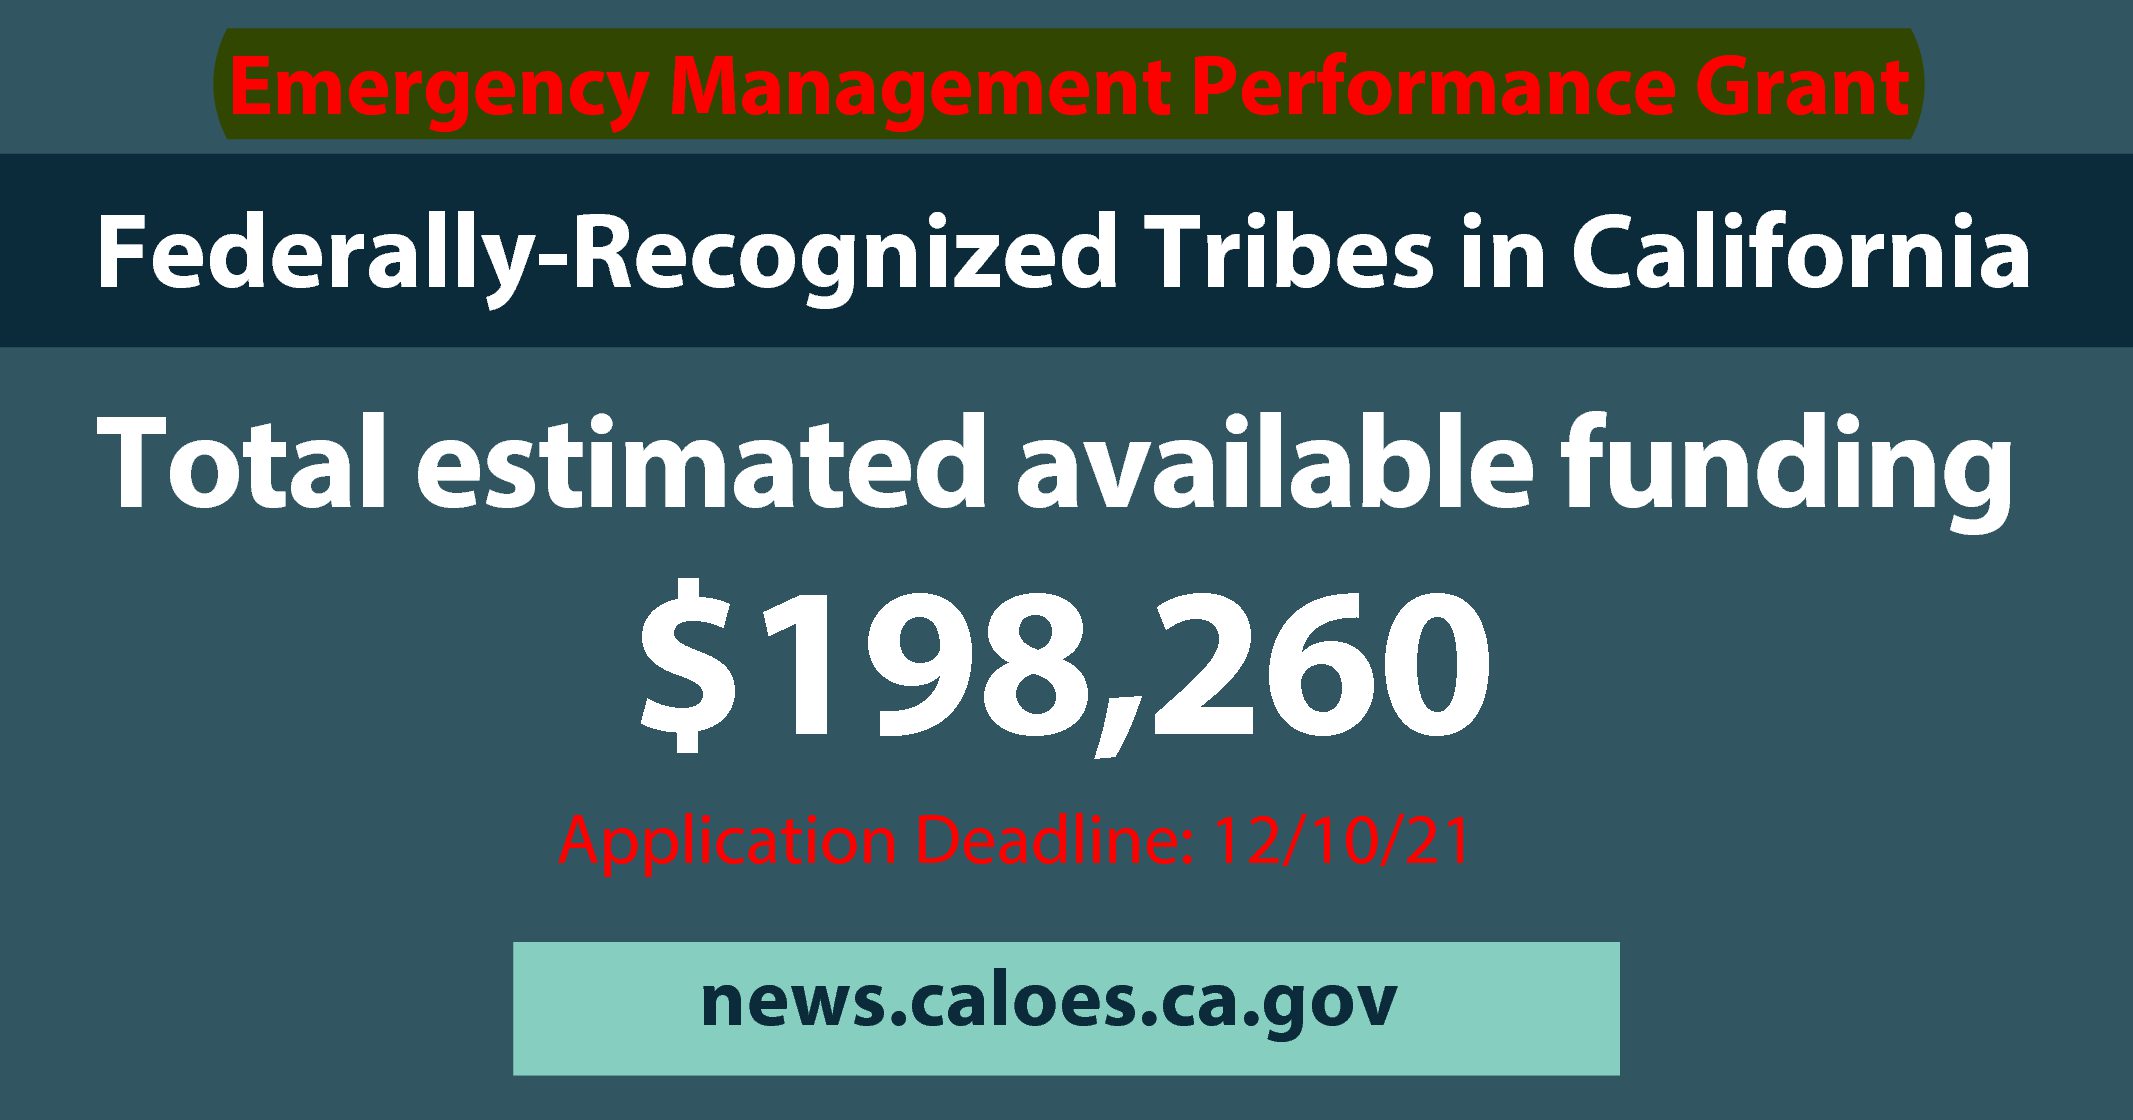 Funds to Strengthen Federally-Recognized Tribes in California During a Disaster